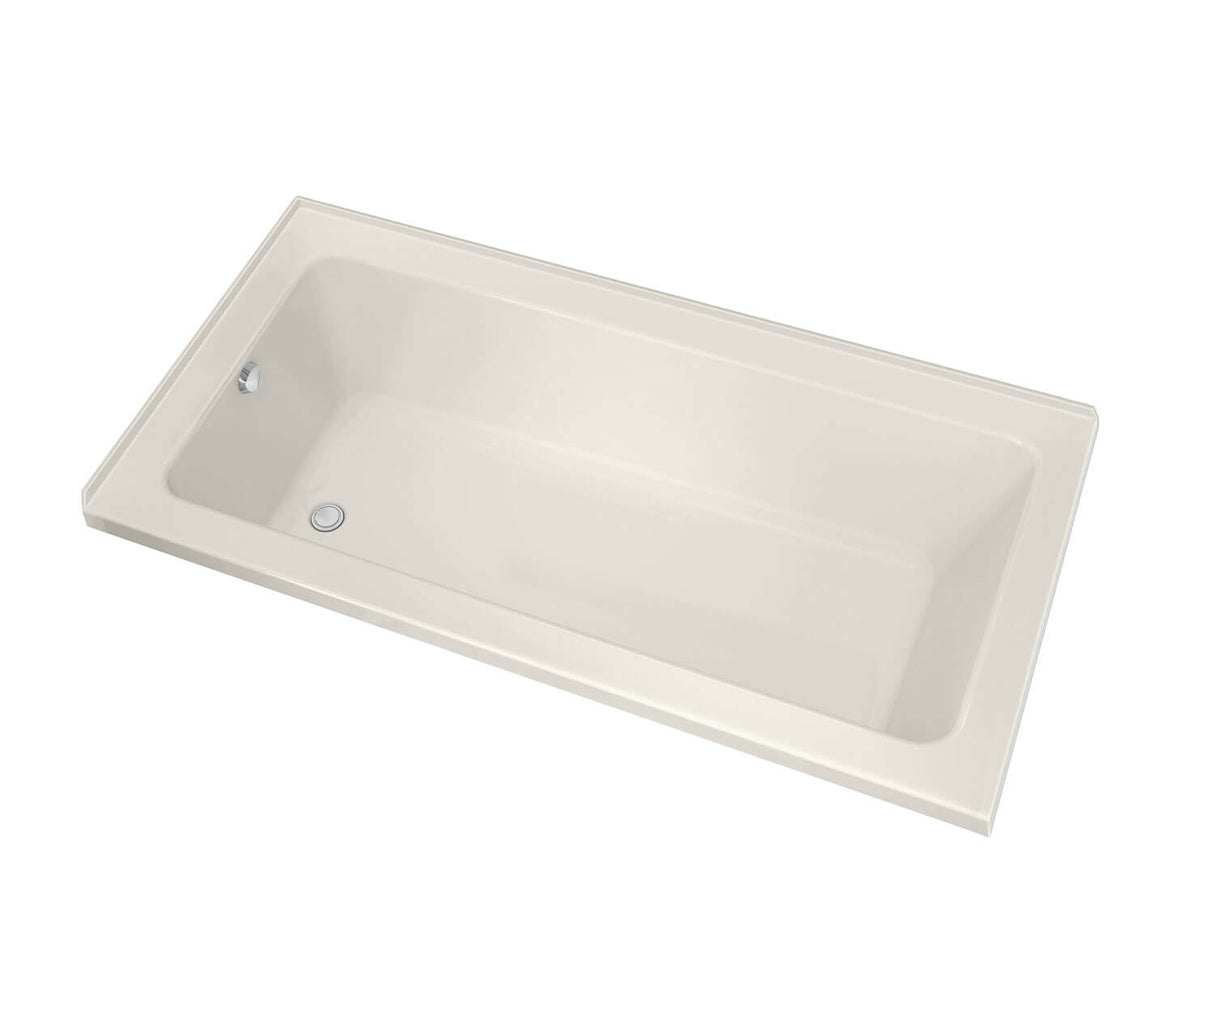 MAAX 106214-R-103-007 Pose 7242 IF Acrylic Corner Left Right-Hand Drain Aeroeffect Bathtub in Biscuit